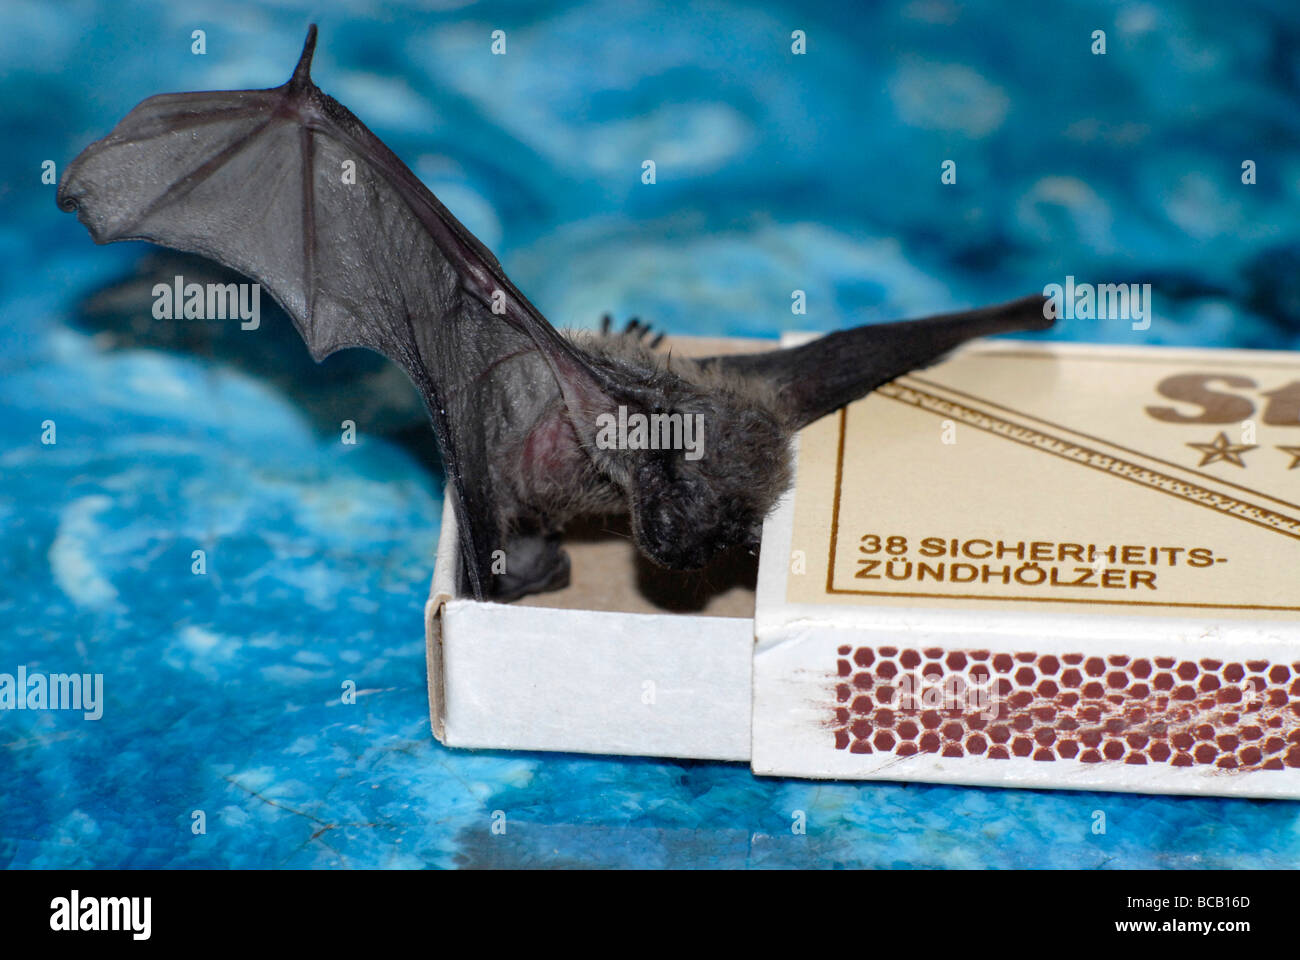 A bat (common pipistrelle), about 3 weeks old, sitting on a box of matches Stock Photo